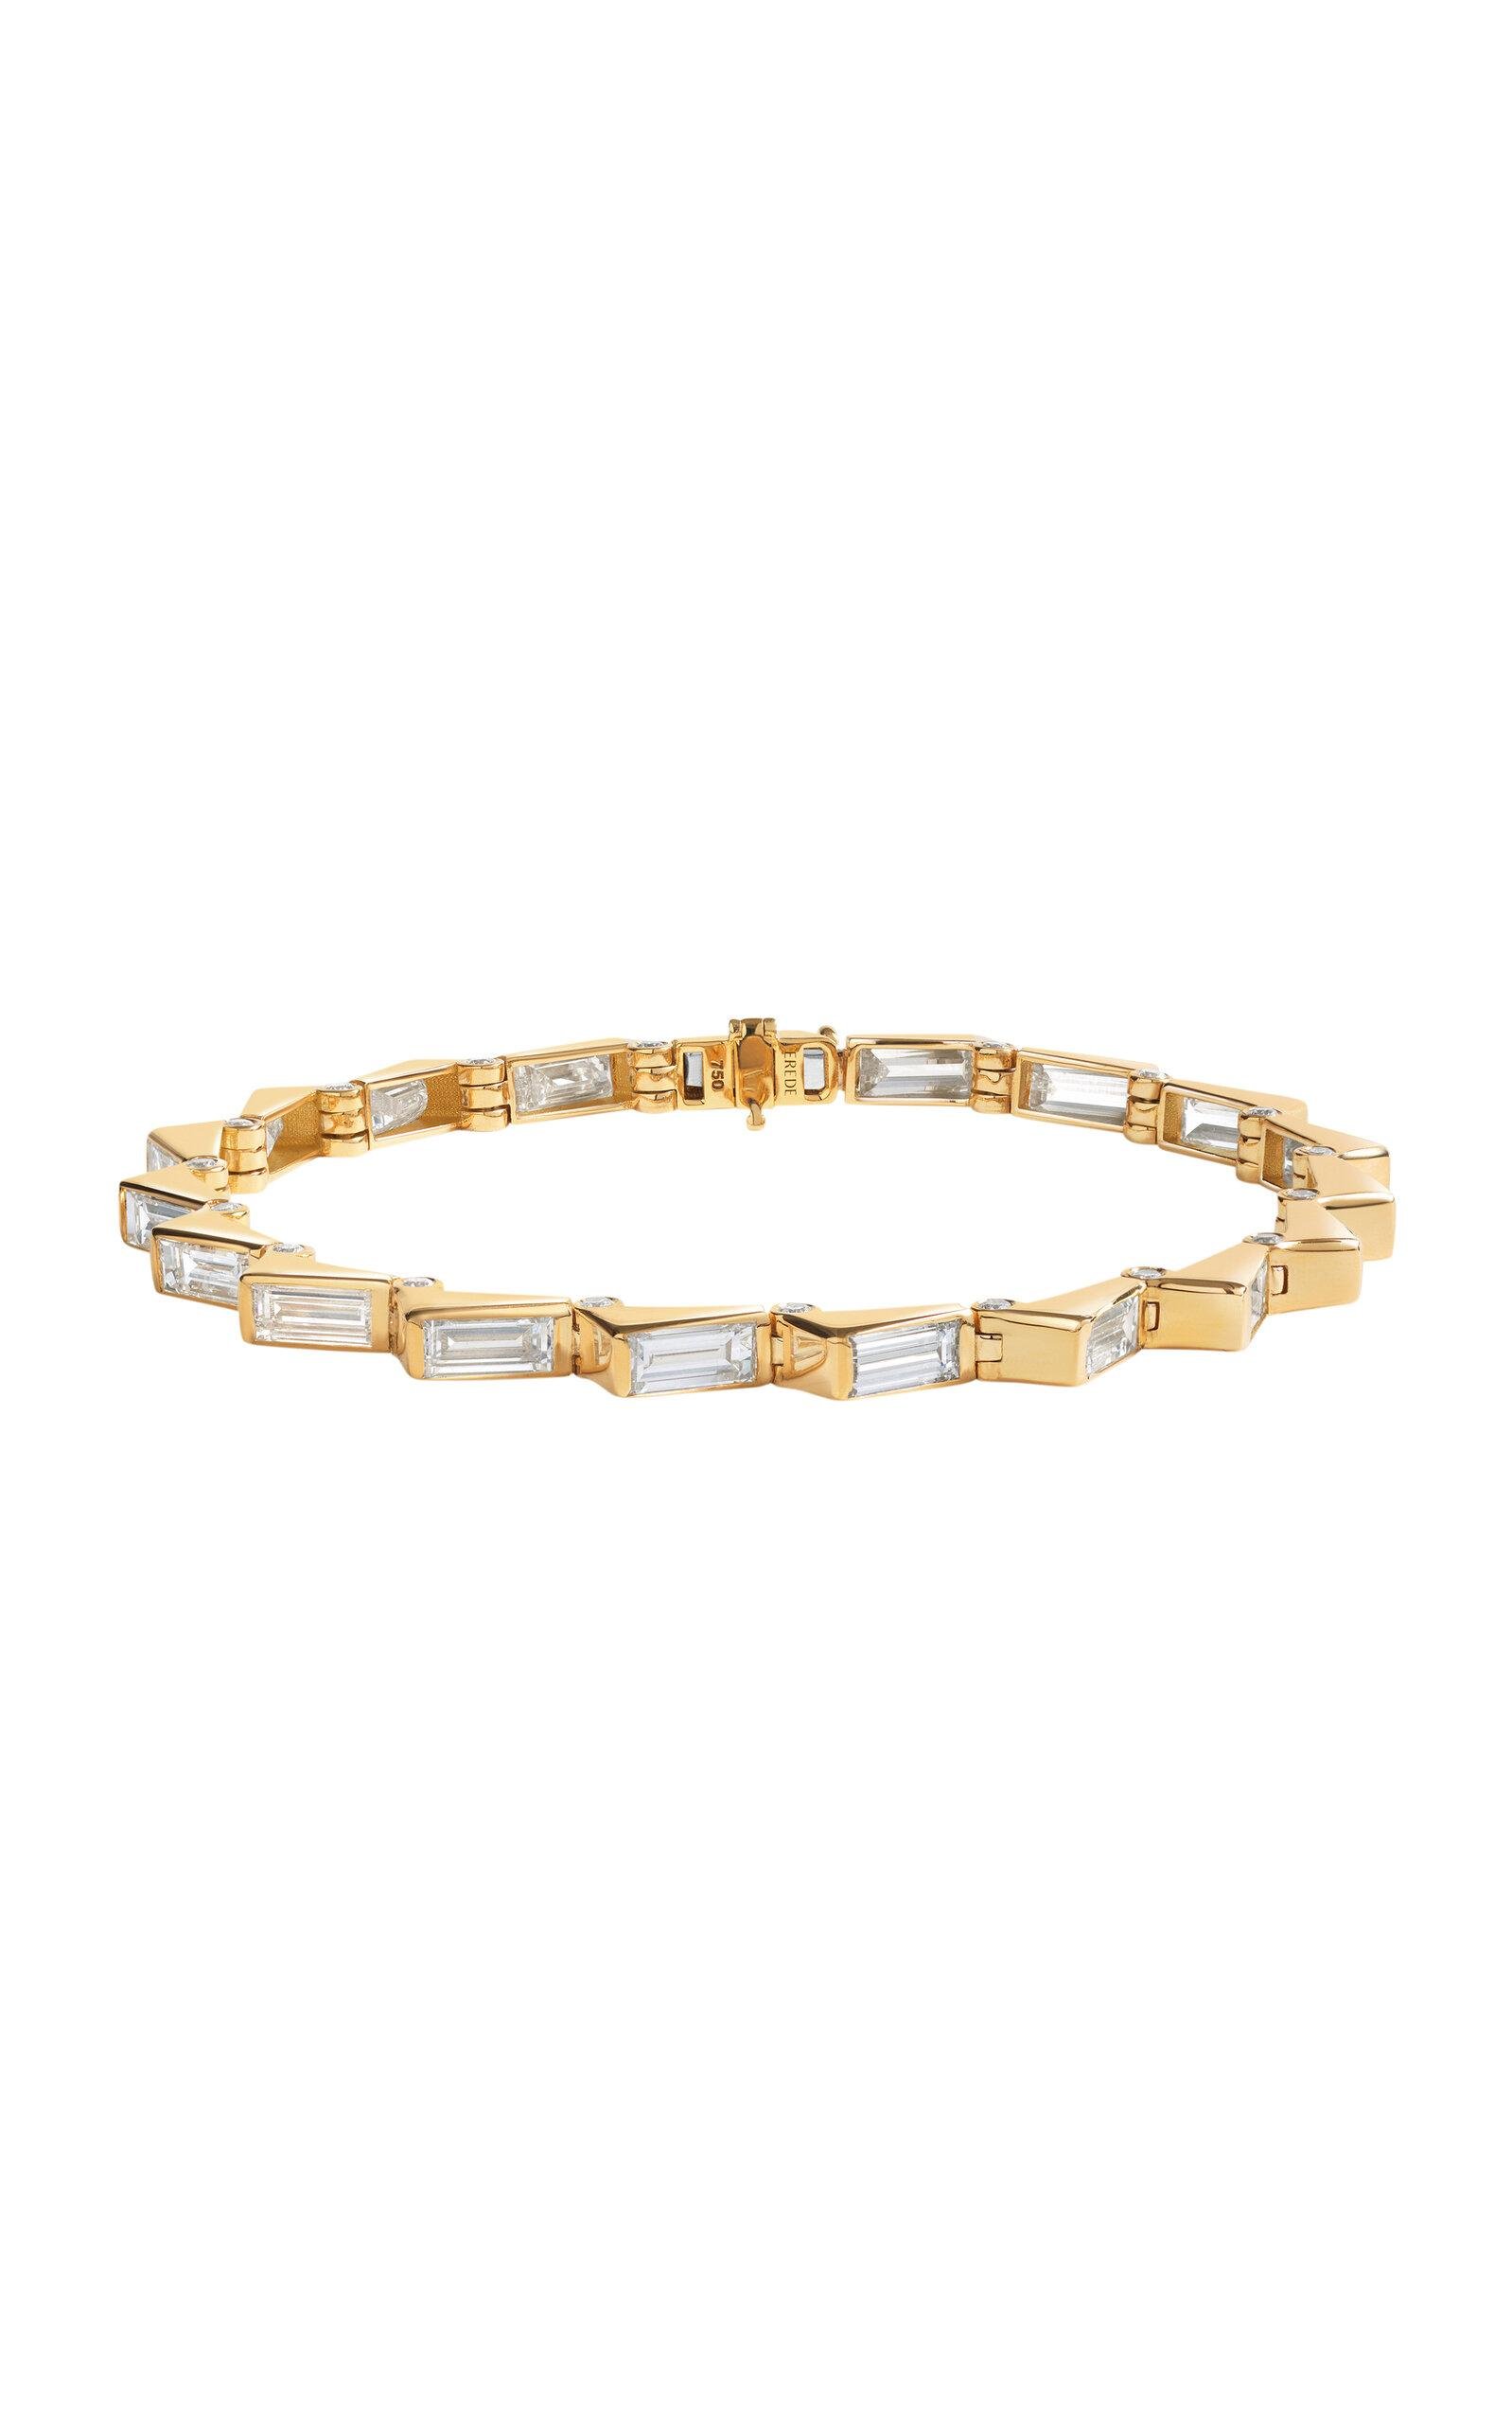 Erede - 18k Yellow Gold Diamond Bracelet - Gold - OS - Only At Moda Operandi - Gifts For Her by EREDE